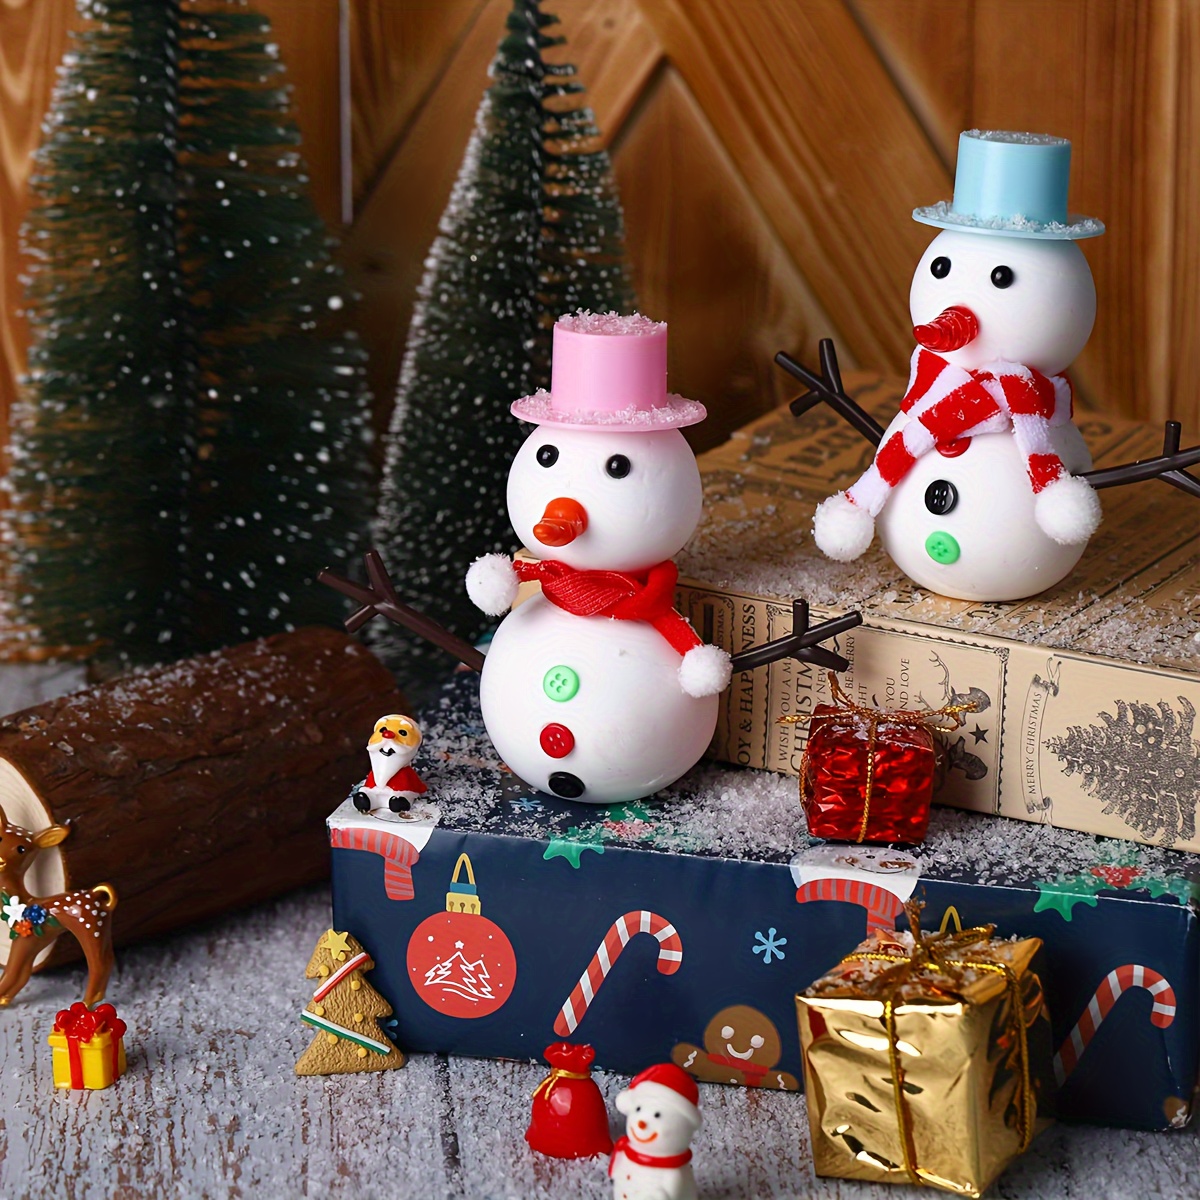 Party Set Fun Decoration Christmas Winter Fun Decorating Snowman Making Kit  Christmas Holiday Gift Snowman Kit Outdoor Making - Realistic Reborn Dolls  for Sale